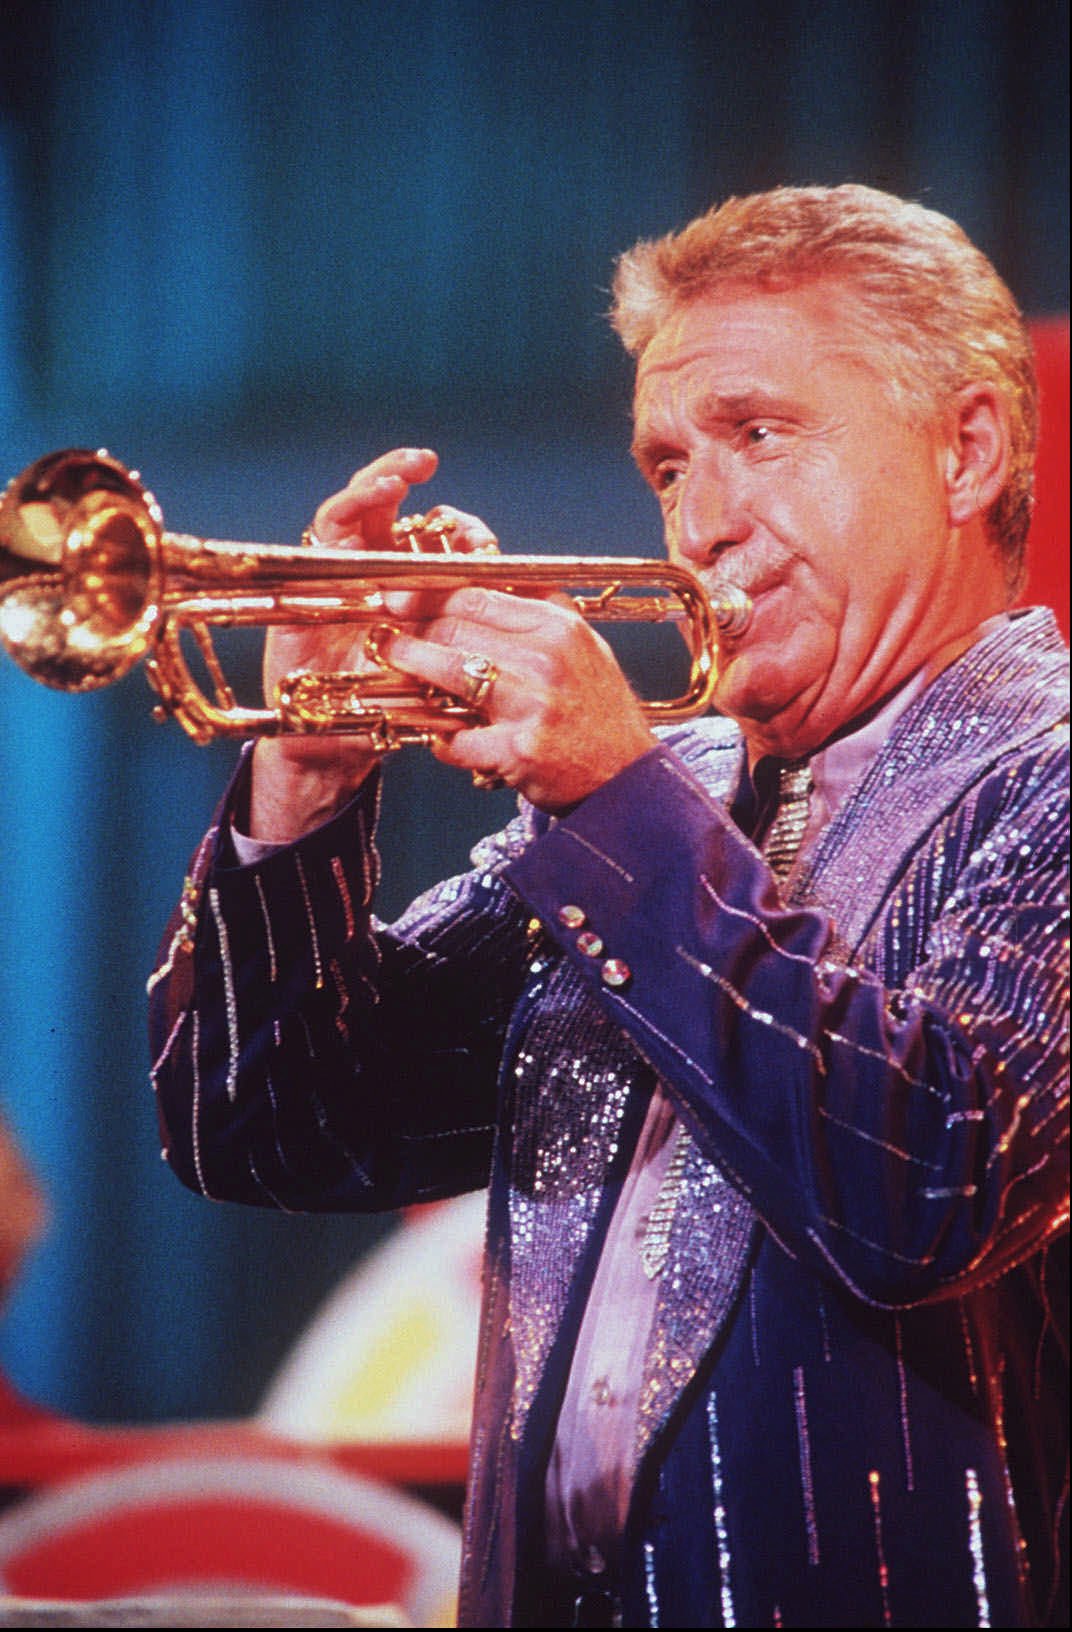 Doc Severinsen latest tour begins at the Massry Center